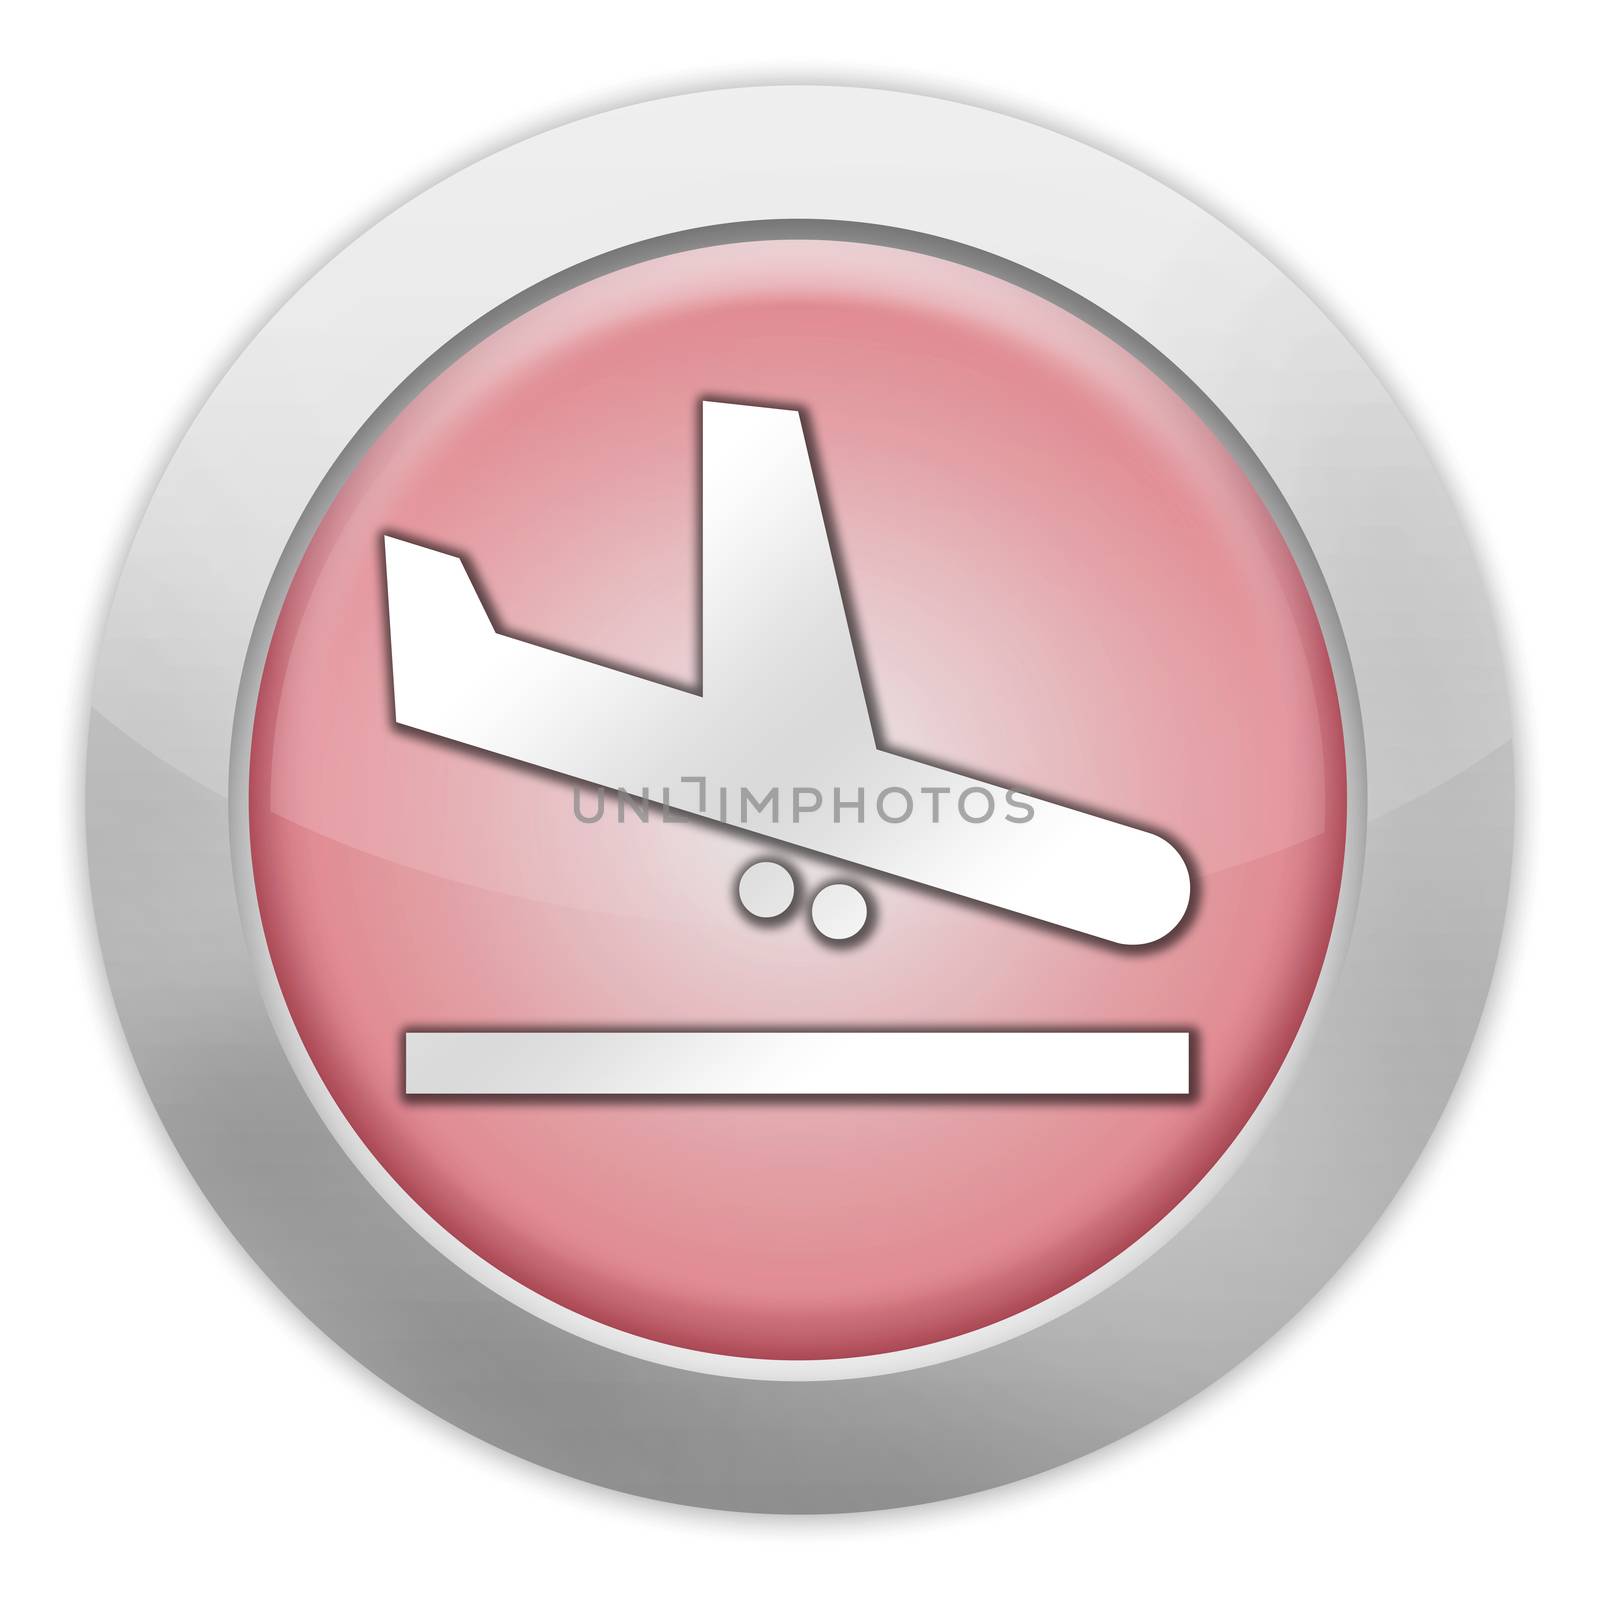 Icon, Button, Pictogram with Airport Arrivals symbol